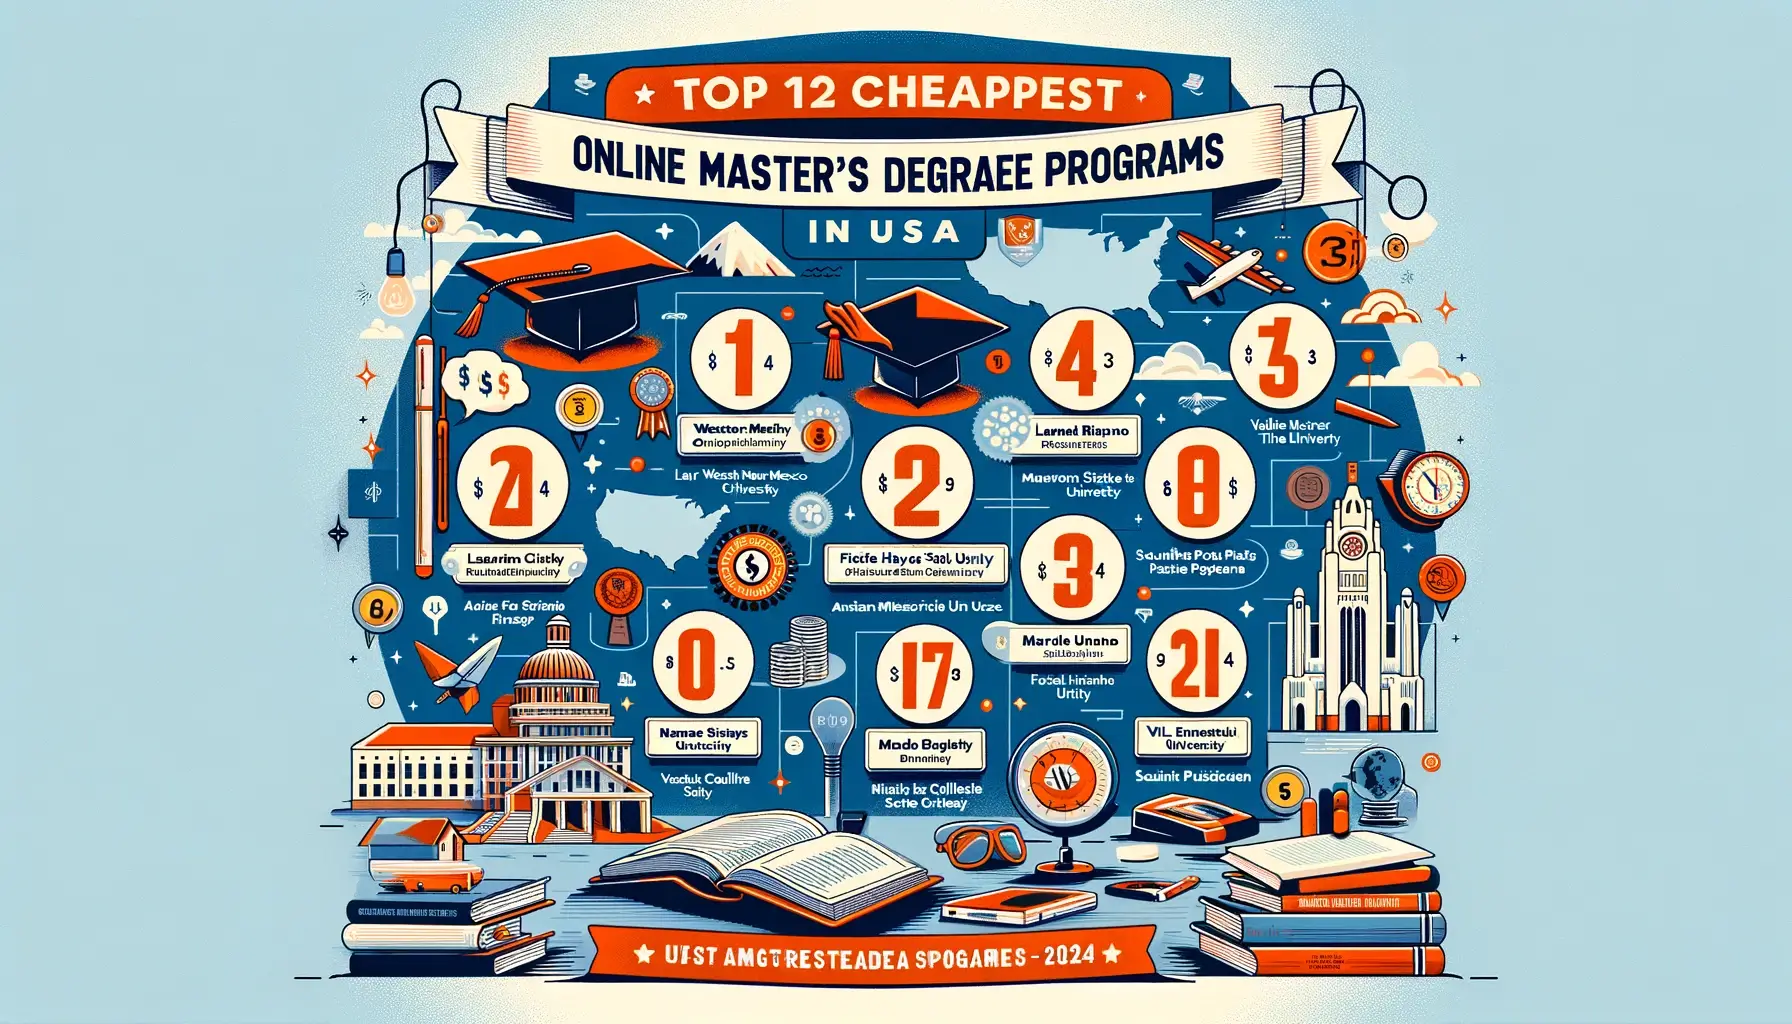 Cheapest Online Master's Degree Programs in the USA.